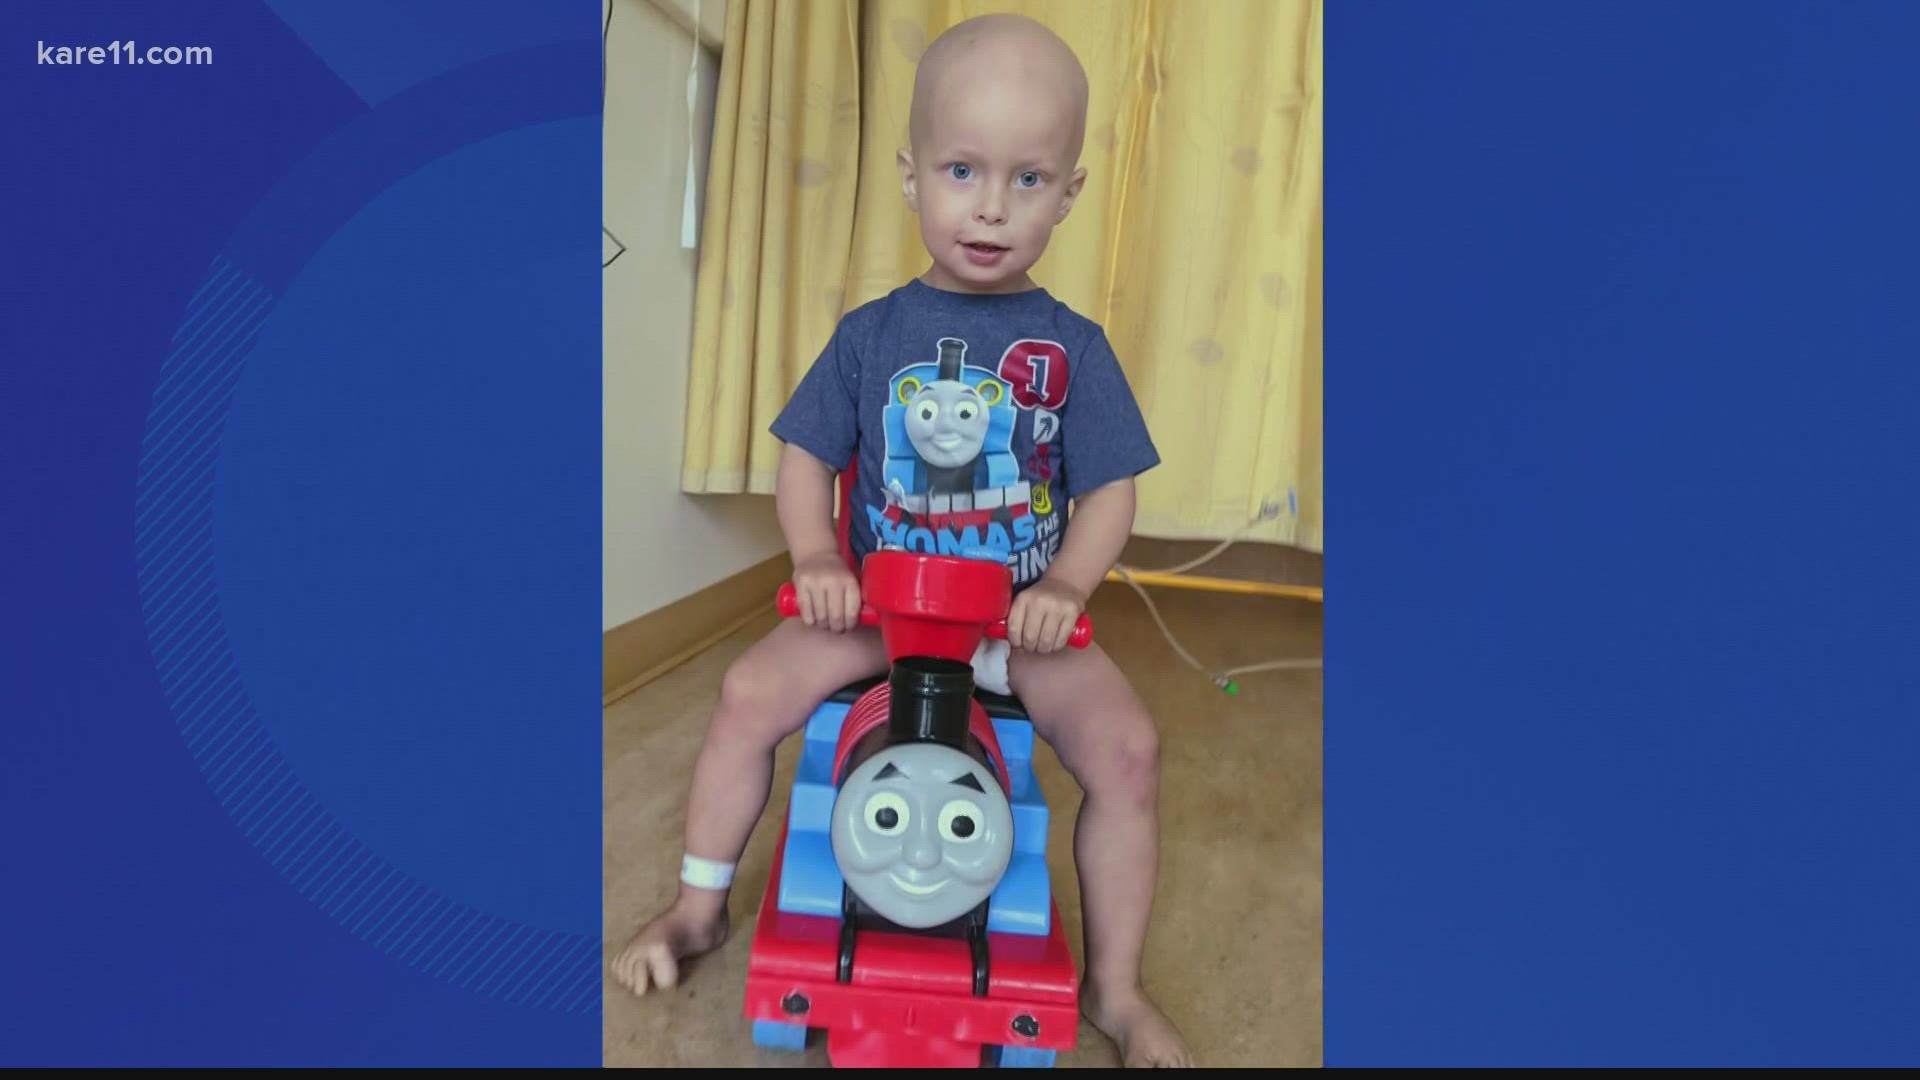 Blood transfusions have helped Barrett, who was diagnosed with a rare cancer earlier this year. Now, his family is hosting a blood drive to help others.